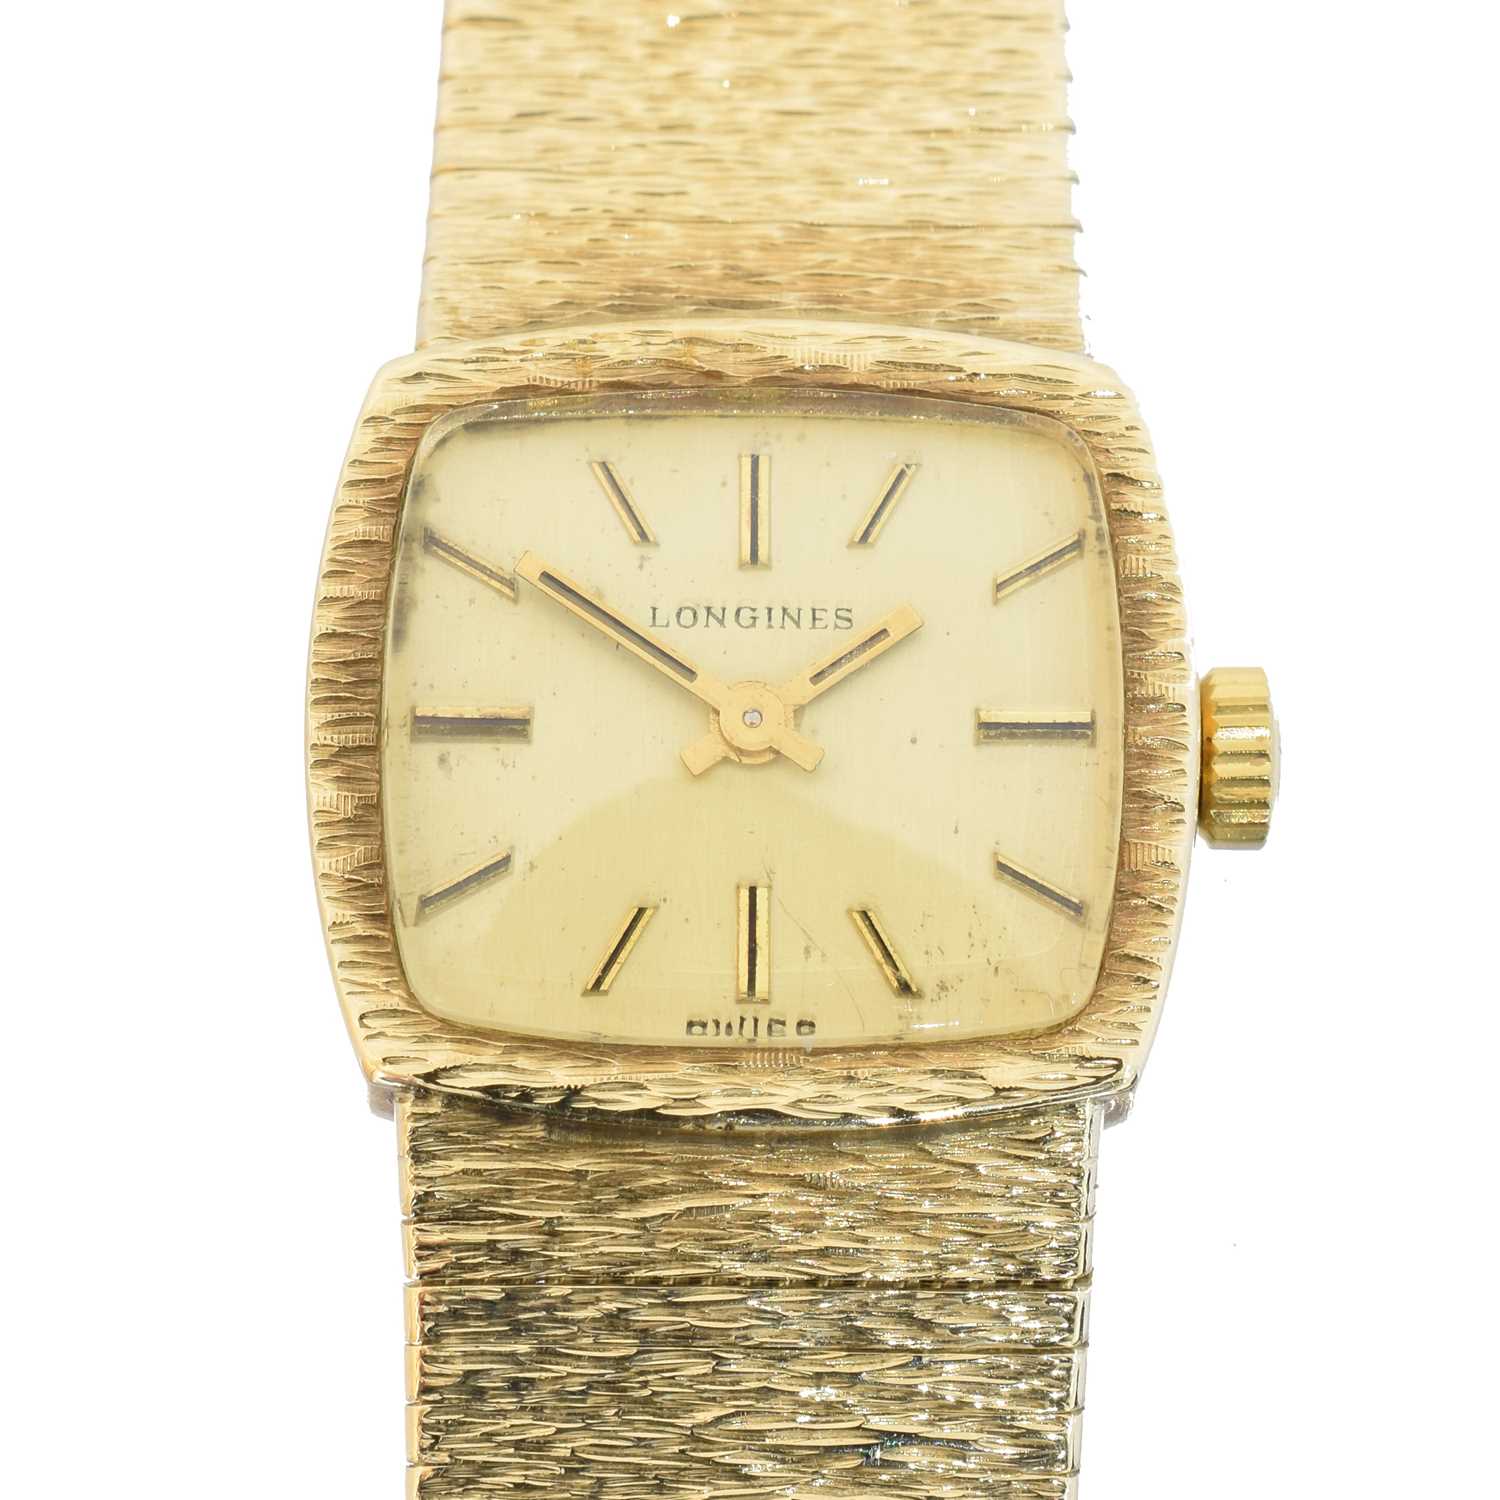 Lot 171 - A 1970s 9ct gold Longines watch